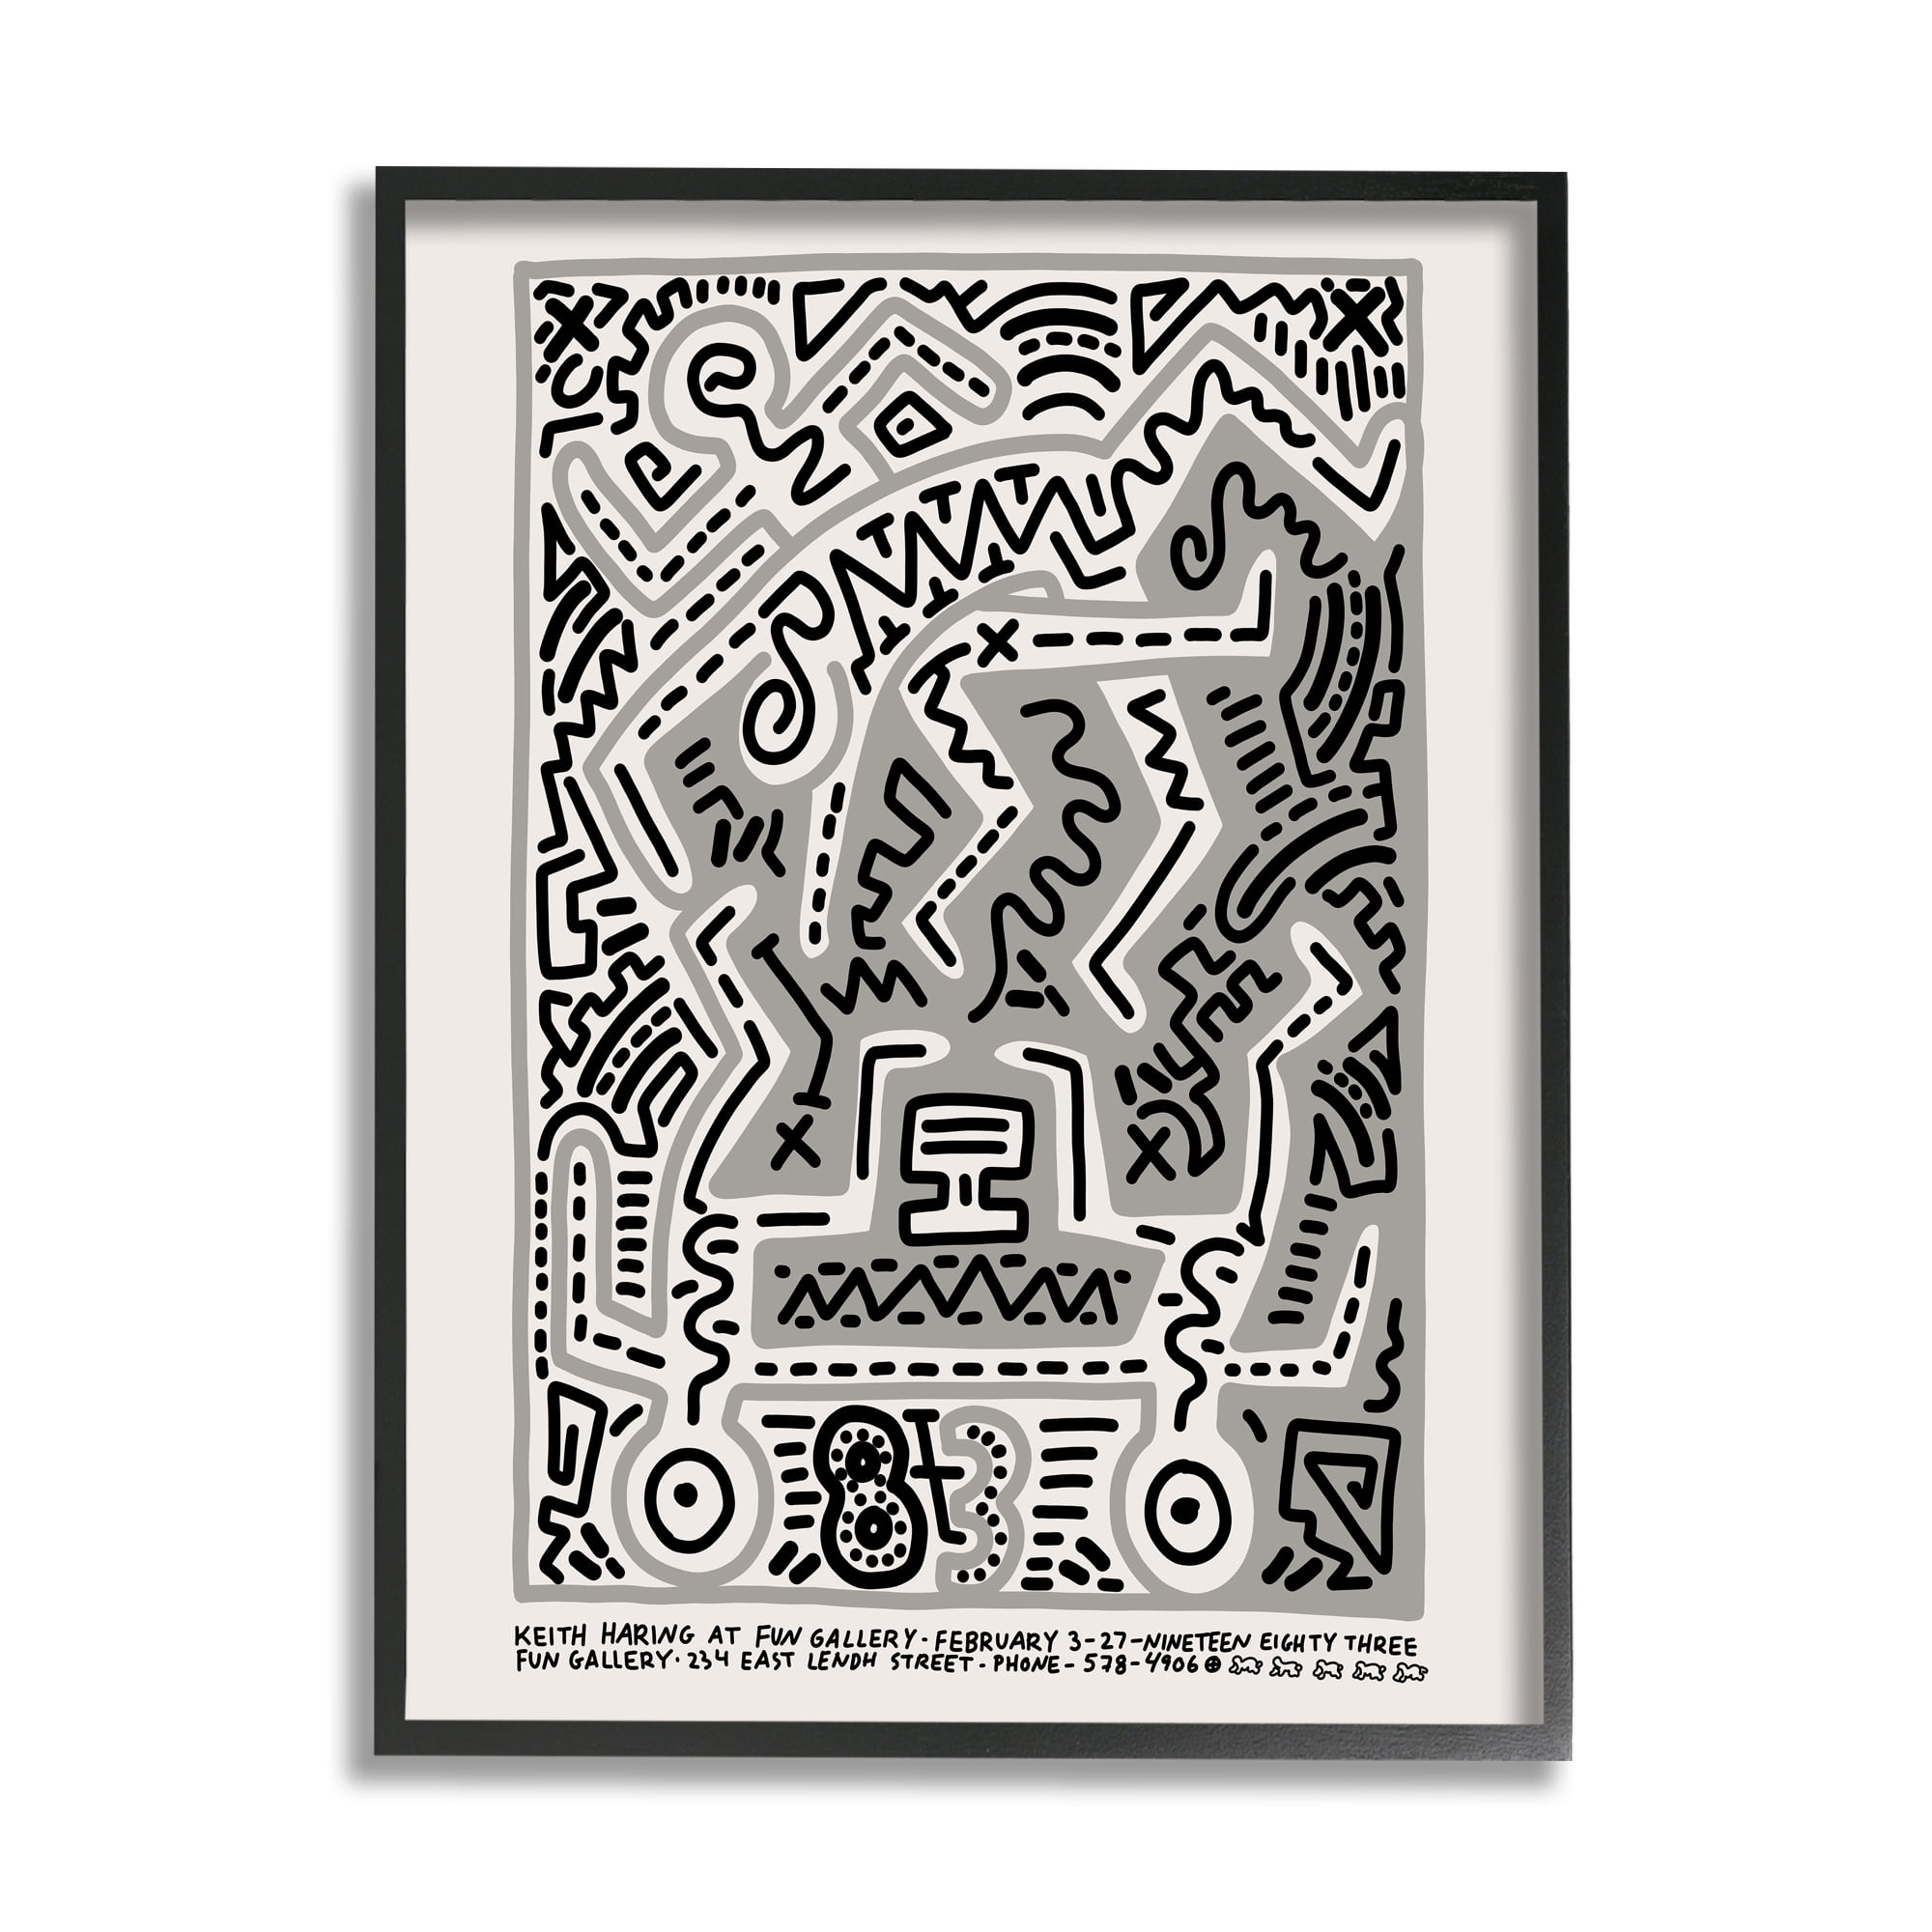 Design Monochrome Wall Style Haring Art, Ruseva Framed Text Pop Industries 30, Ros Stupell Keith Squiggle x by 24